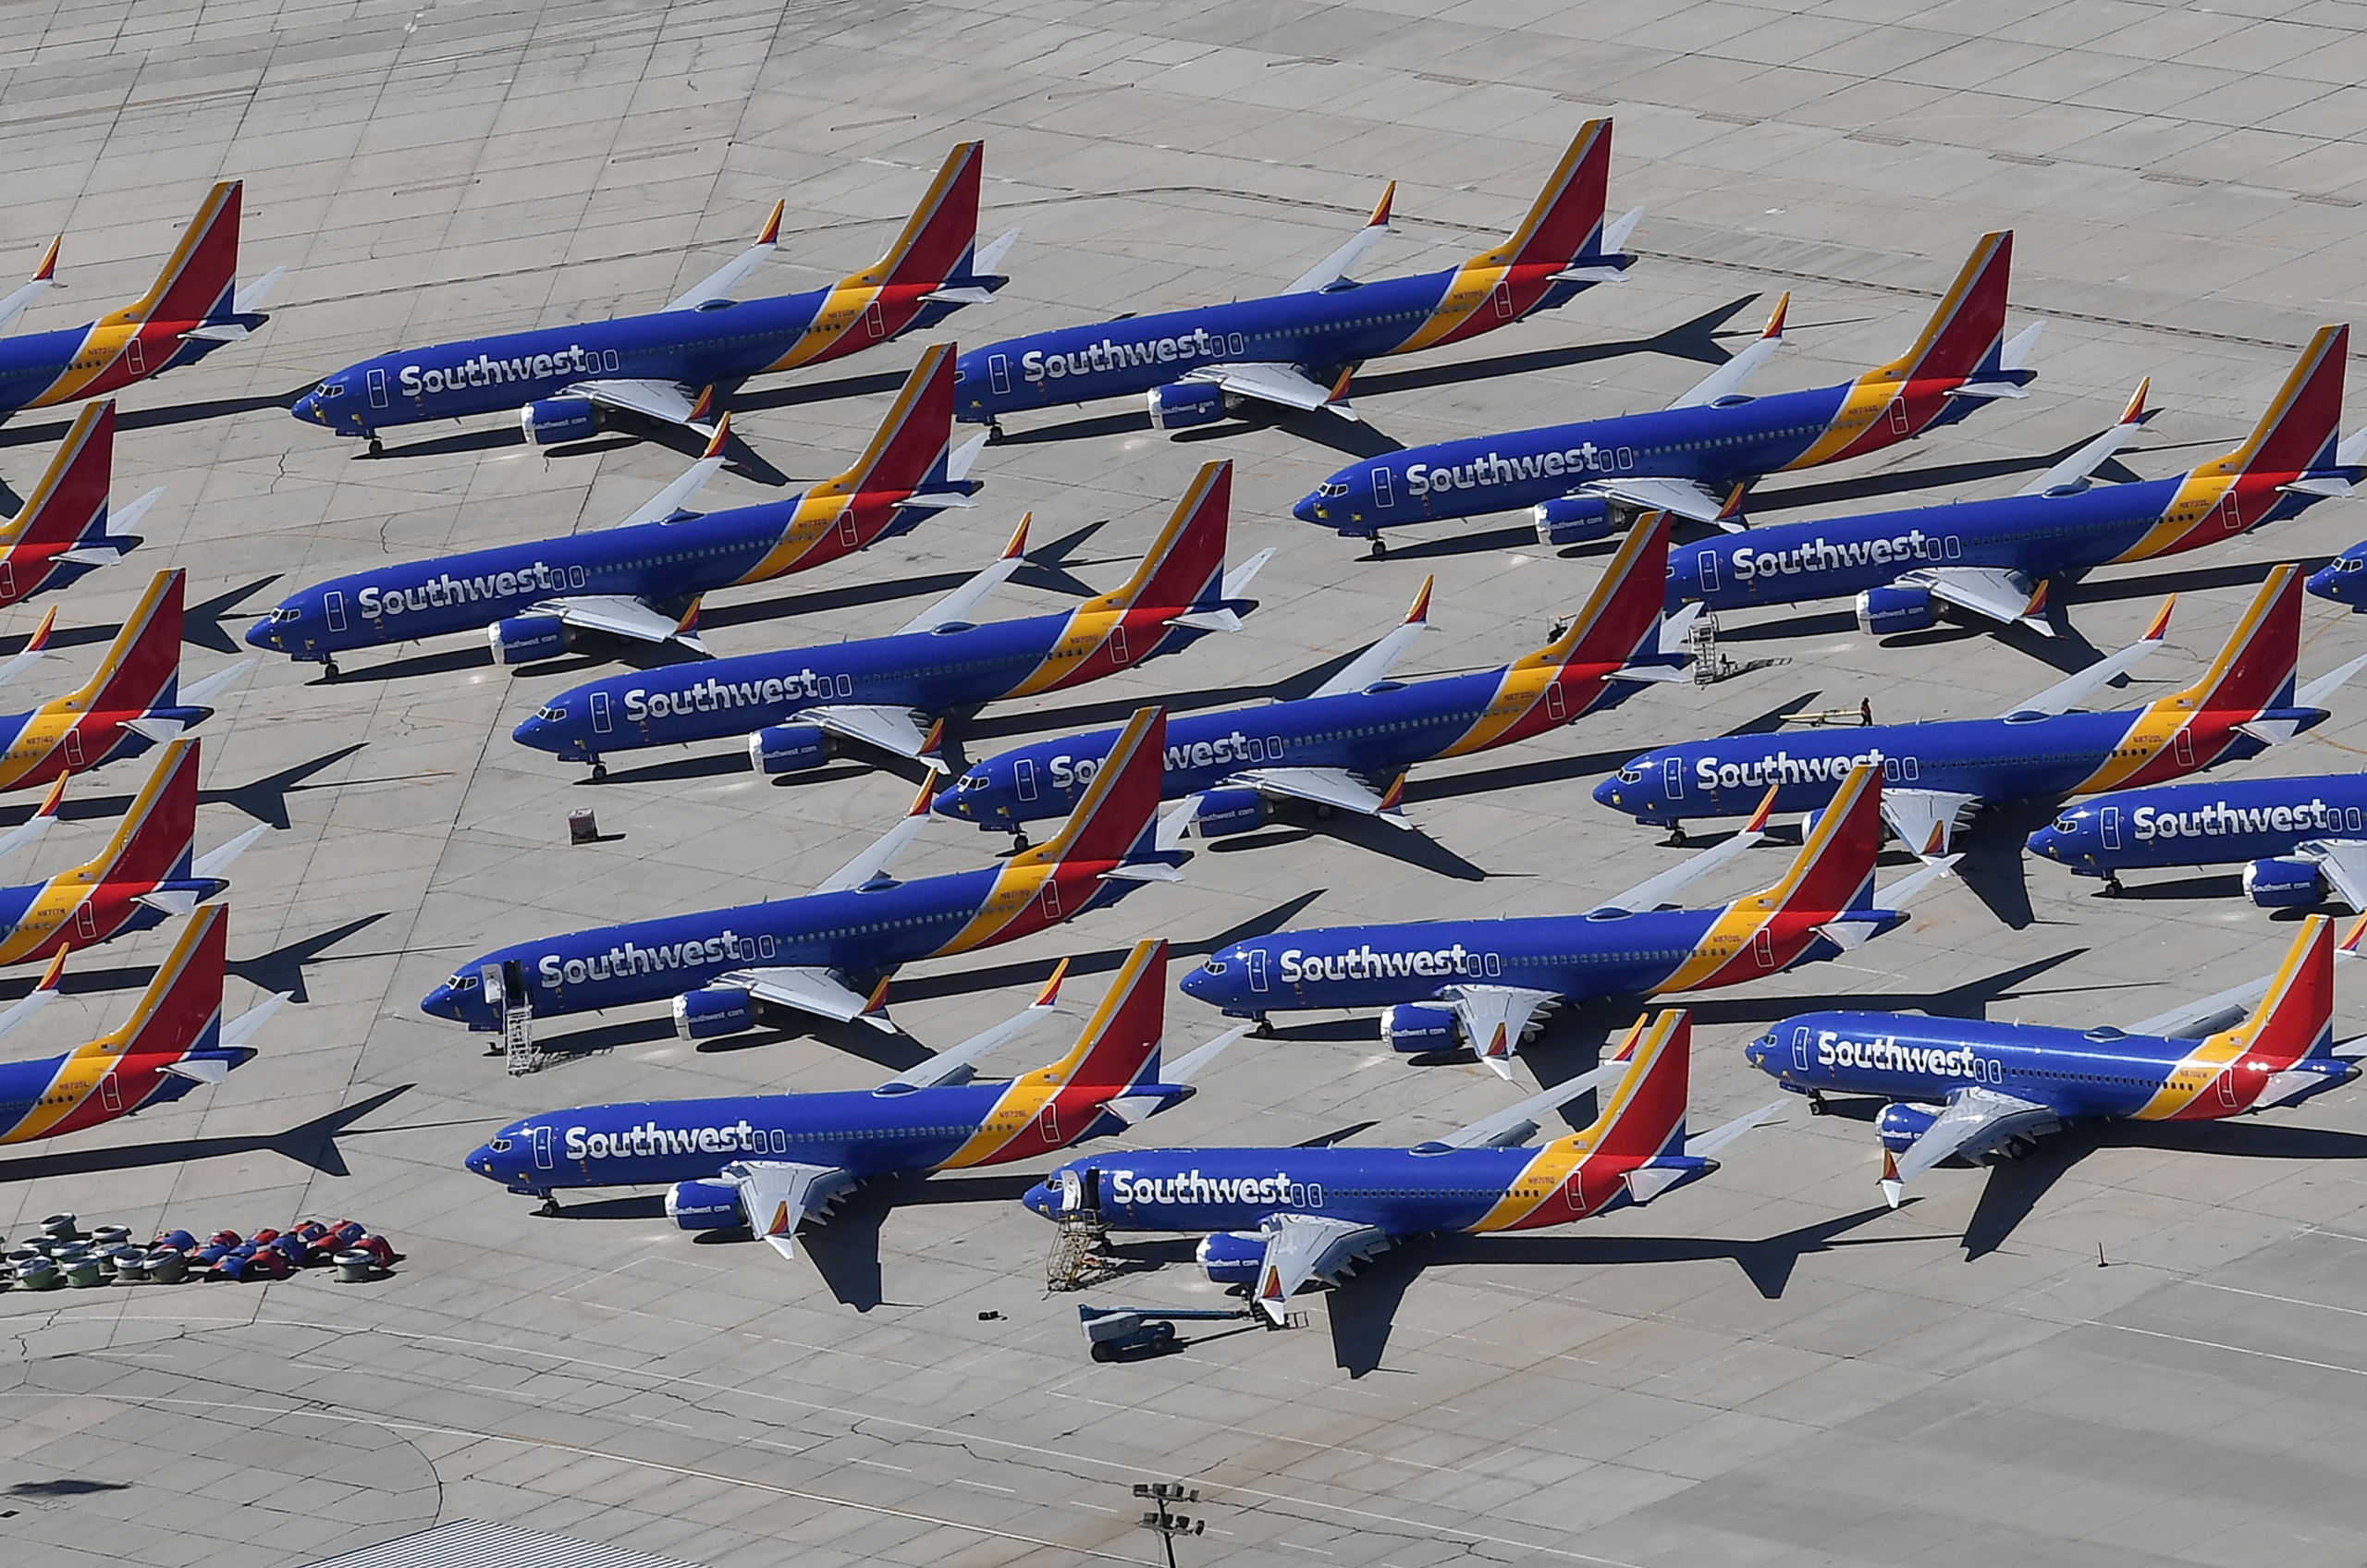 2019-03-28 15:12:57 Southwest Airlines Boeing 737 MAX aircraft are parked on the tarmac after being grounded, at the Southern California Logistics Airport in Victorville, California on March 28, 2019. After two fatal crashes in five months, Boeing is trying hard -- very hard -- to present itself as unfazed by the crisis that surrounds the company. The company's sprawling factory in Renton, Washington is a hive of activity on this sunny Wednesday, March 28, 2019, during a tightly-managed media tour as Boeing tries to communicate confidence that it has nothing to hide. Boeing gathered hundreds of pilots and reporters to unveil the changes to the MCAS stall prevention system, which has been implicated in the crashes in Ethiopia and Indonesia, as part of a charm offensive to restore the company's reputation. Mark RALSTON / AFP